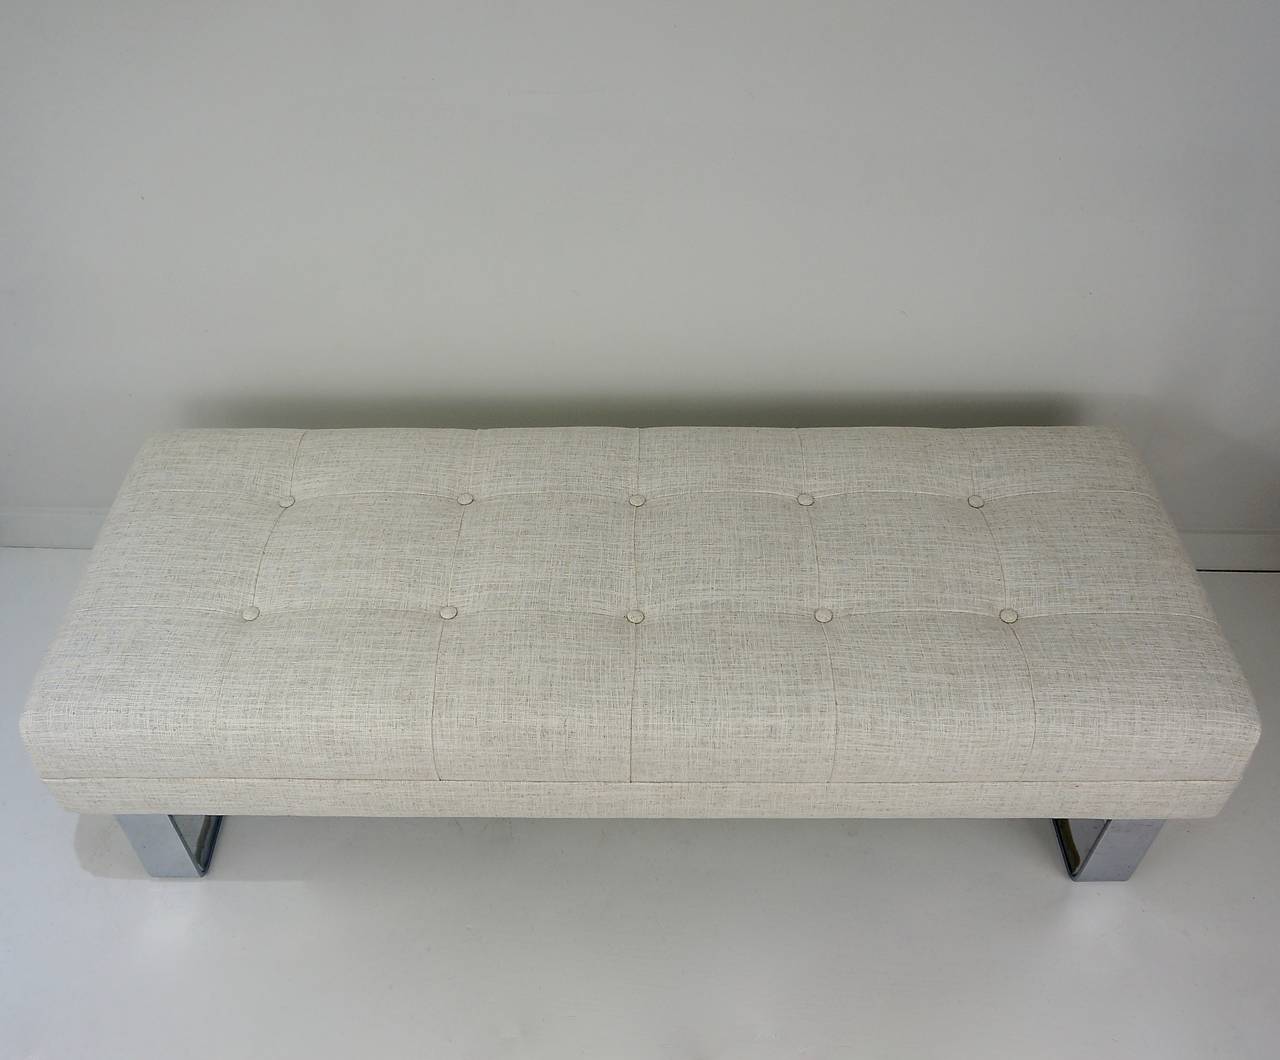 This incredible bench was designed in the 1970s by Milo Baughman for the Thayer Coggin Furnniture Company. It has recently been reupholstered with a button-tufted top in a cream-colored, blended-linen fabric. 

This bench would be the perfect size